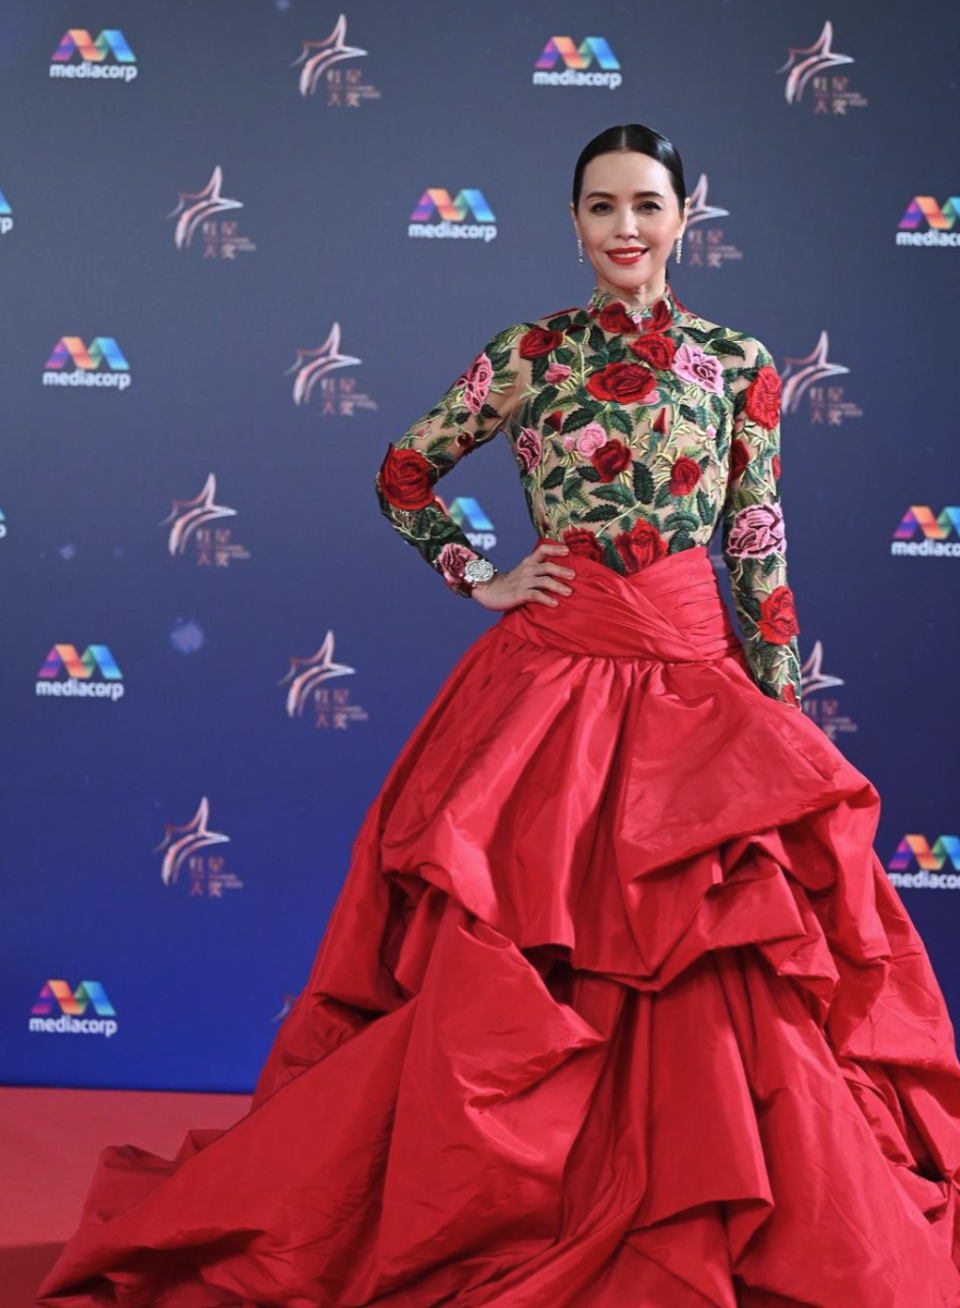 Actress Zoe Tay wore a timeless Tiered Floral Appliqué Gown from Oscar De La Renta on the red carpet with an embroidered floral appliqué bodice and complementary tiered silk-faille skirt, followed by a vintage Christian Lacroix lace and velvet gown to present the award for Top 10 Most Popular Male Artistes. She also wore Cartier jewellery and a Frank Muller watch. Her stylist Johnny Khoo worked with luxury resale marketplace Vestiaire Collective for this timeless look.